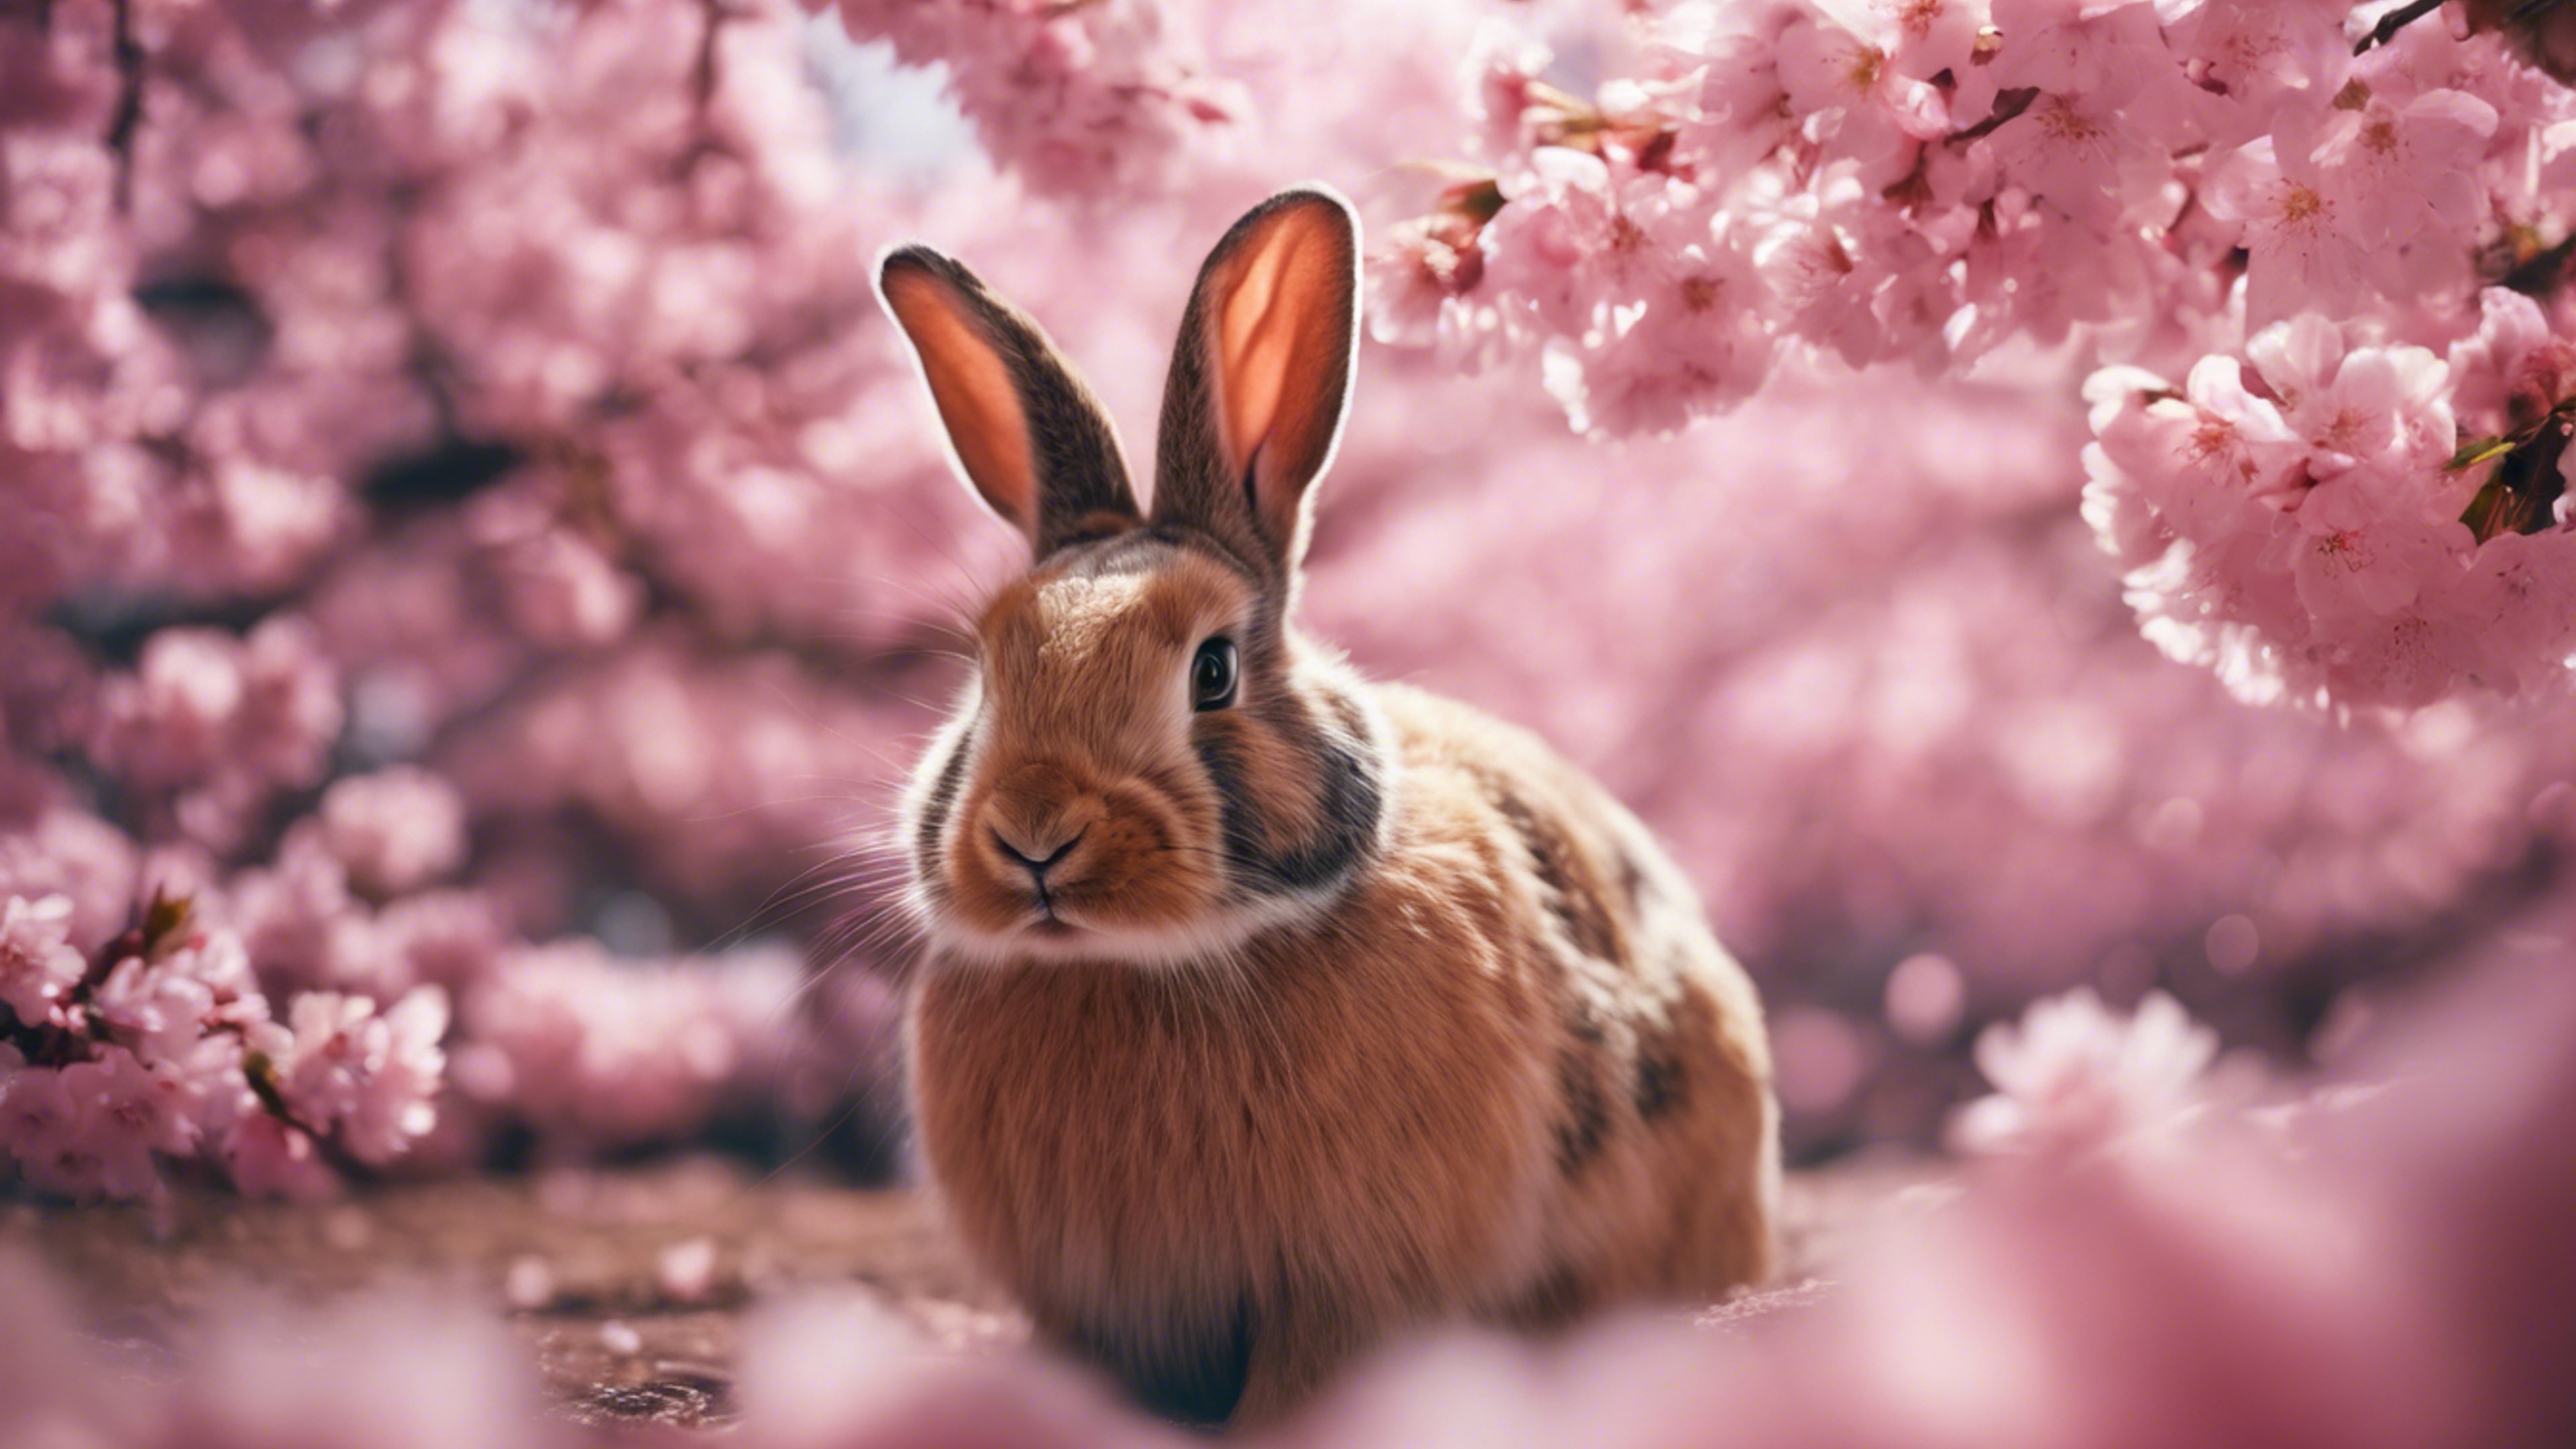 A rabbit amid a cherry blossom festival, surrounded by vibrant pink petals. Behang[82443ce6430044309a8d]